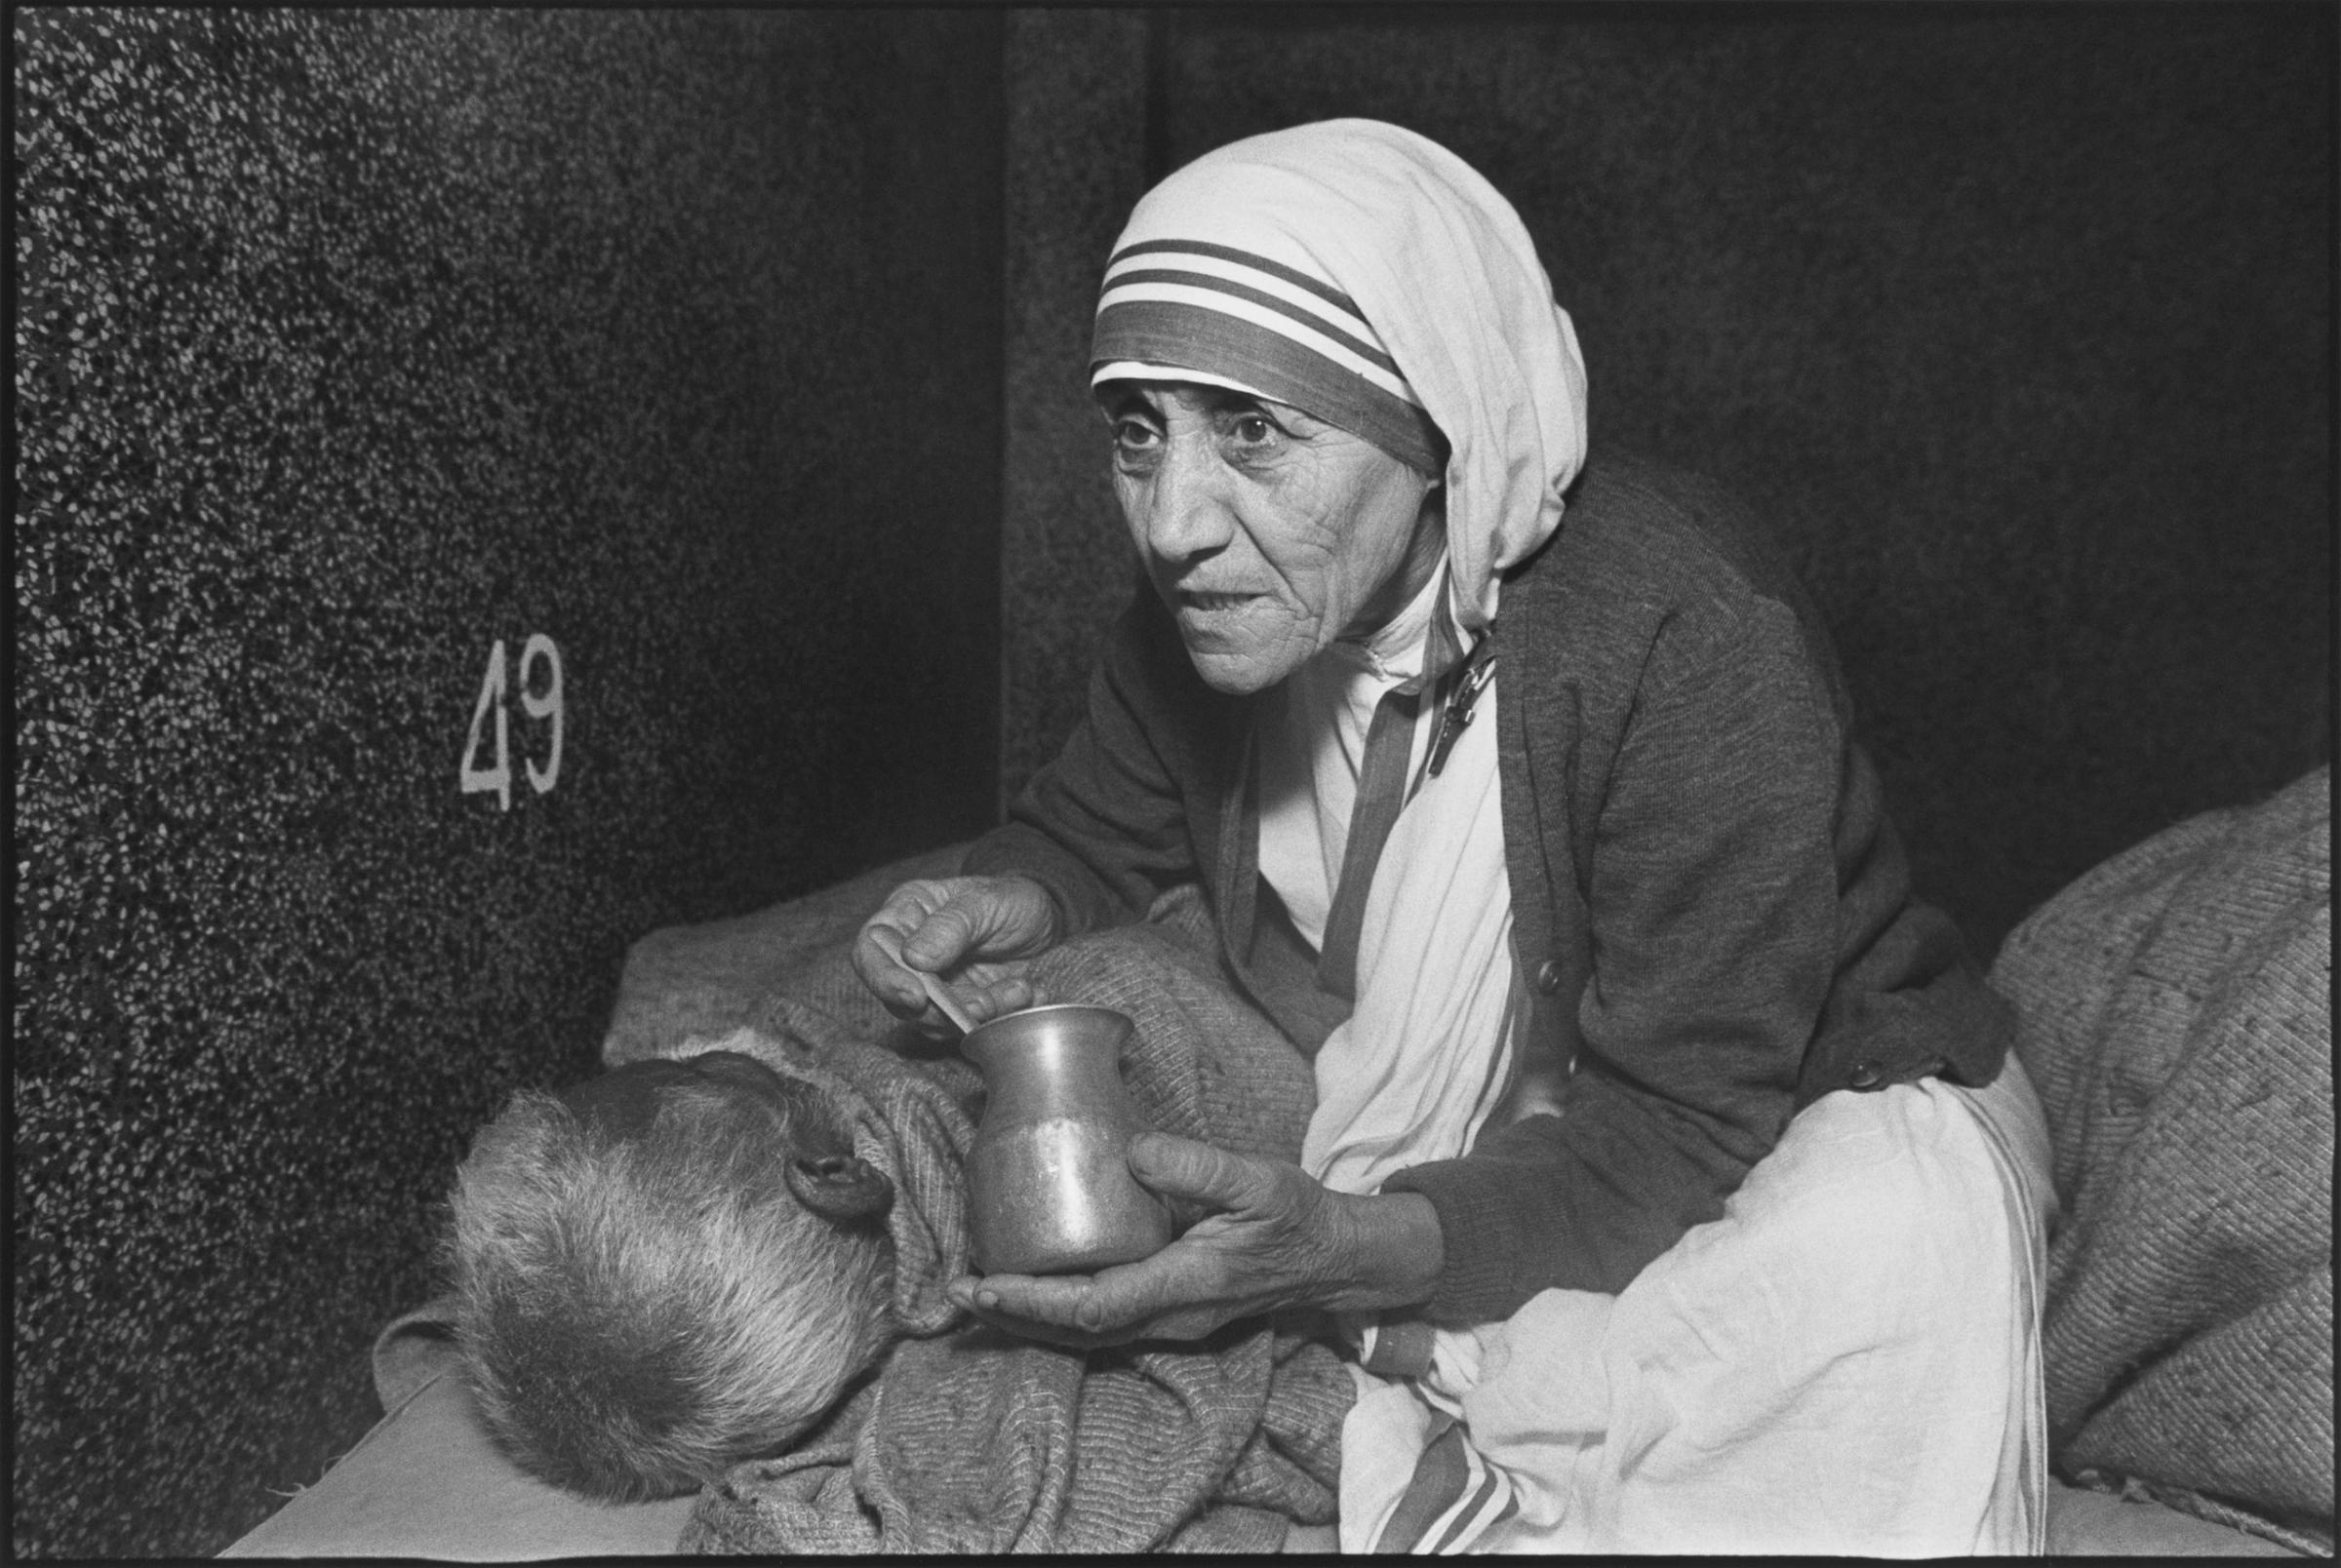 Mother Teresa at the home for the Dying, Mother Teresa's Missions of Charity, Calcutta, India, 1980